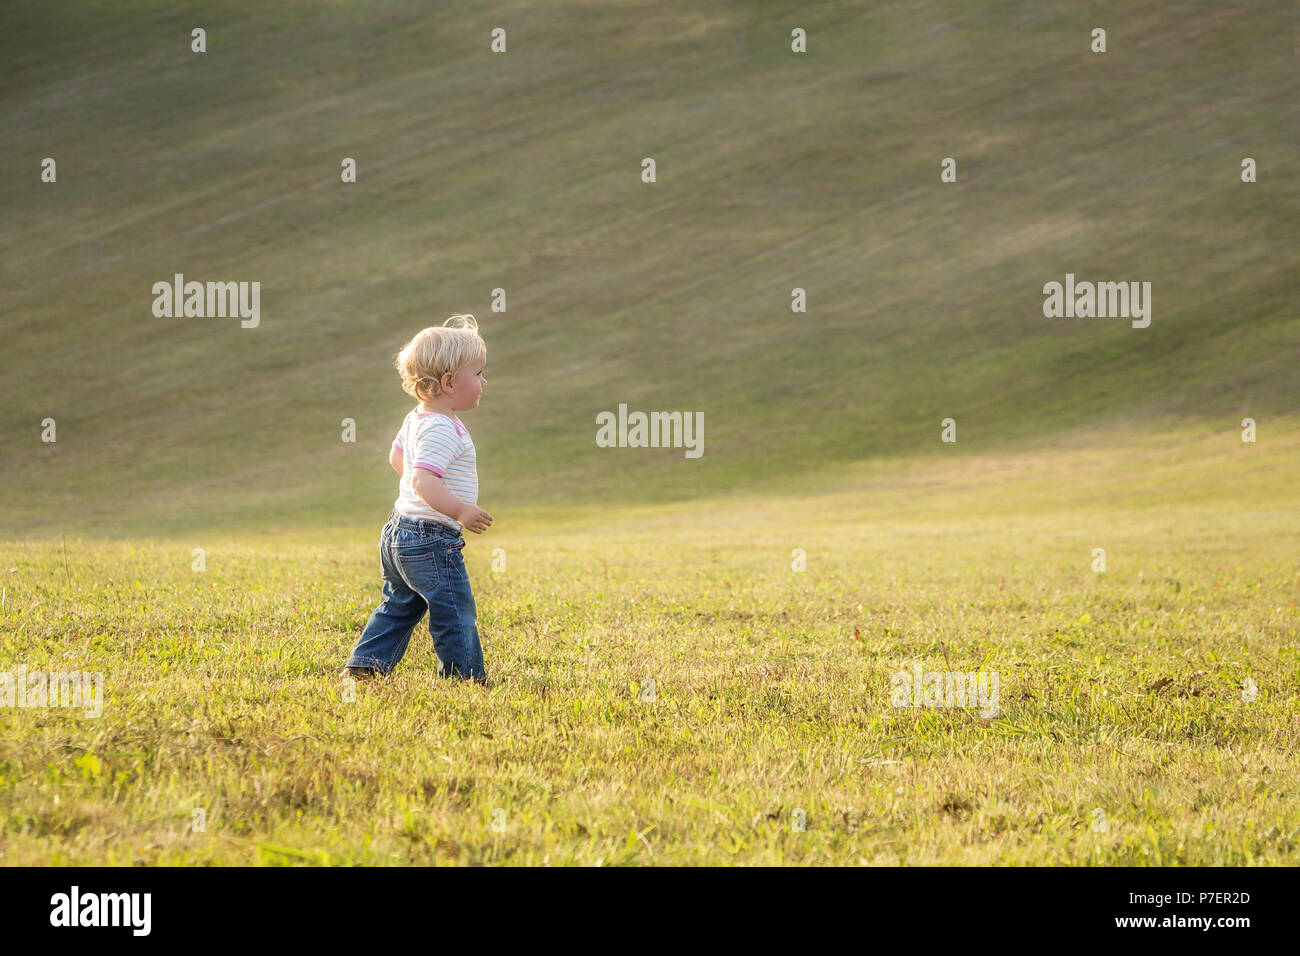 Child, baby girl, toddler, walking alone on a large meadow in late summer sun, end of August. Stock Photo